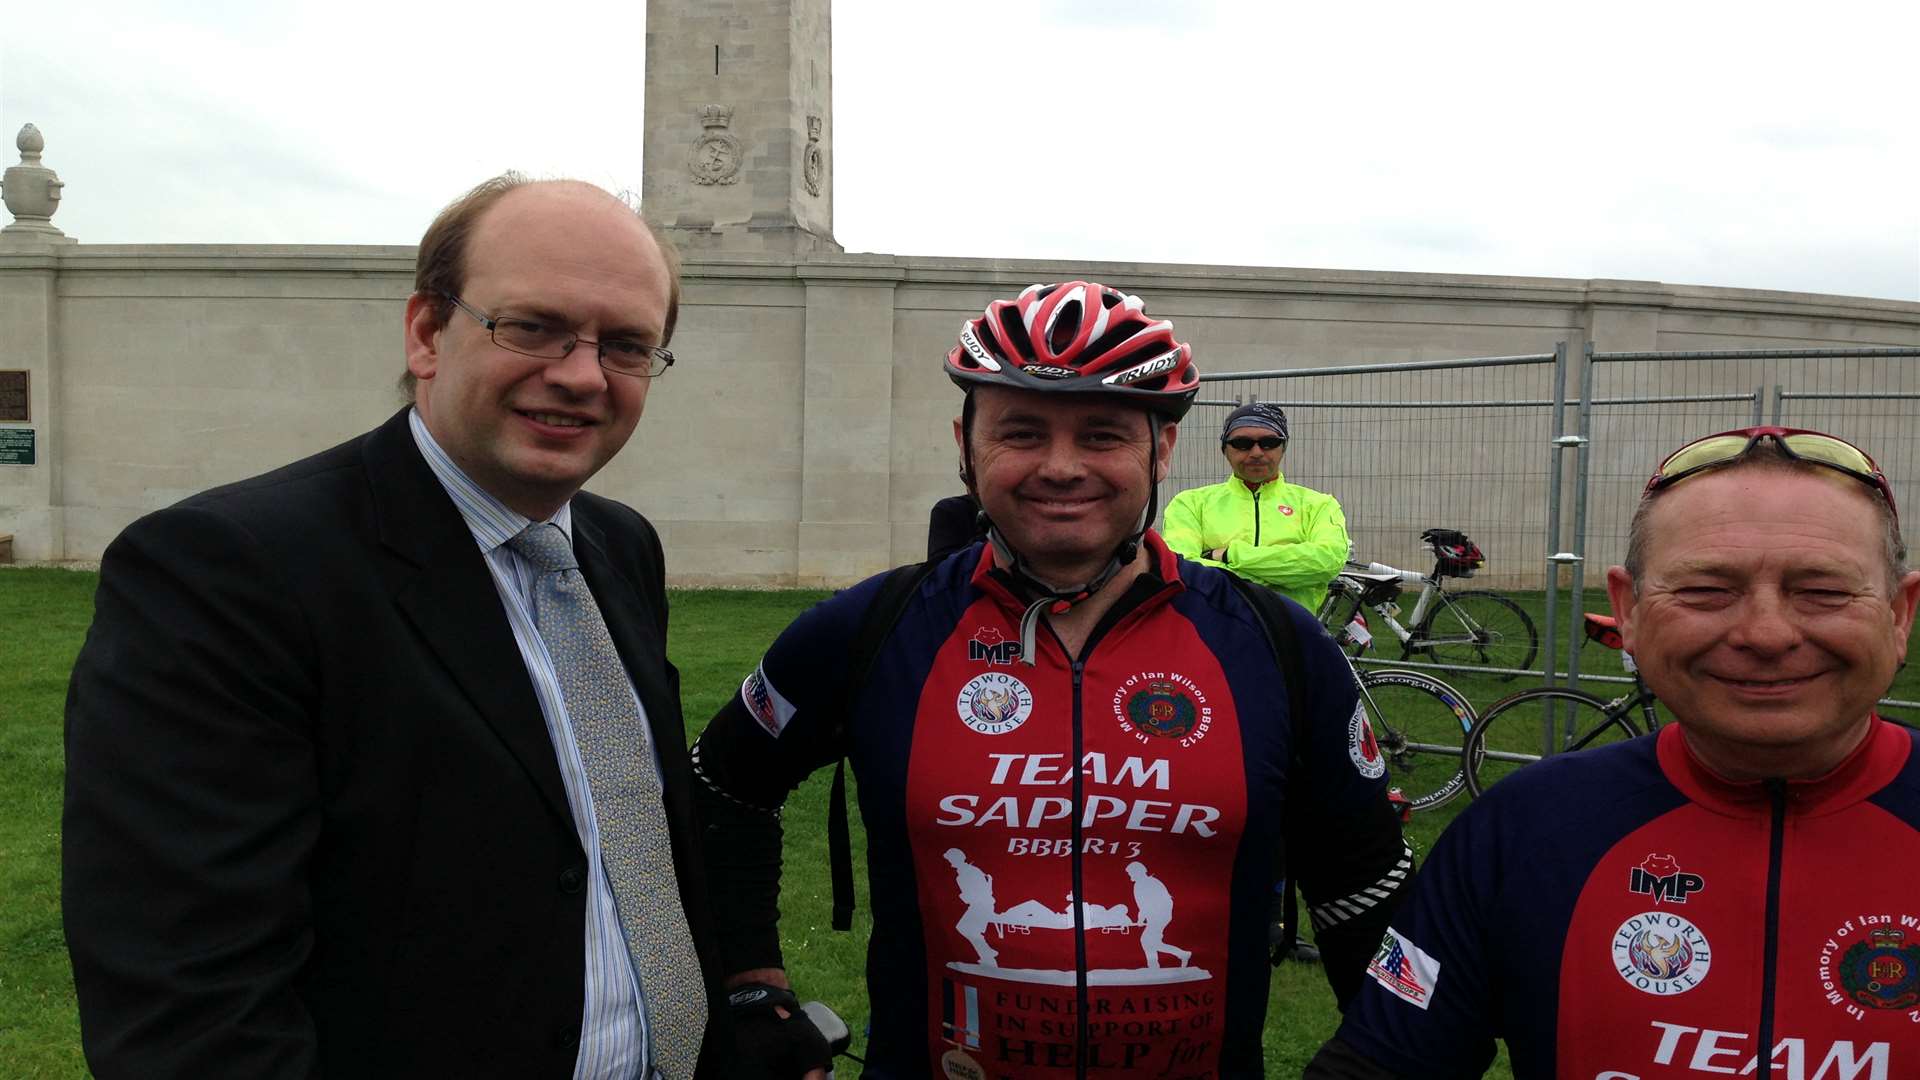 MP Mark Reckless meets some of the bike riders